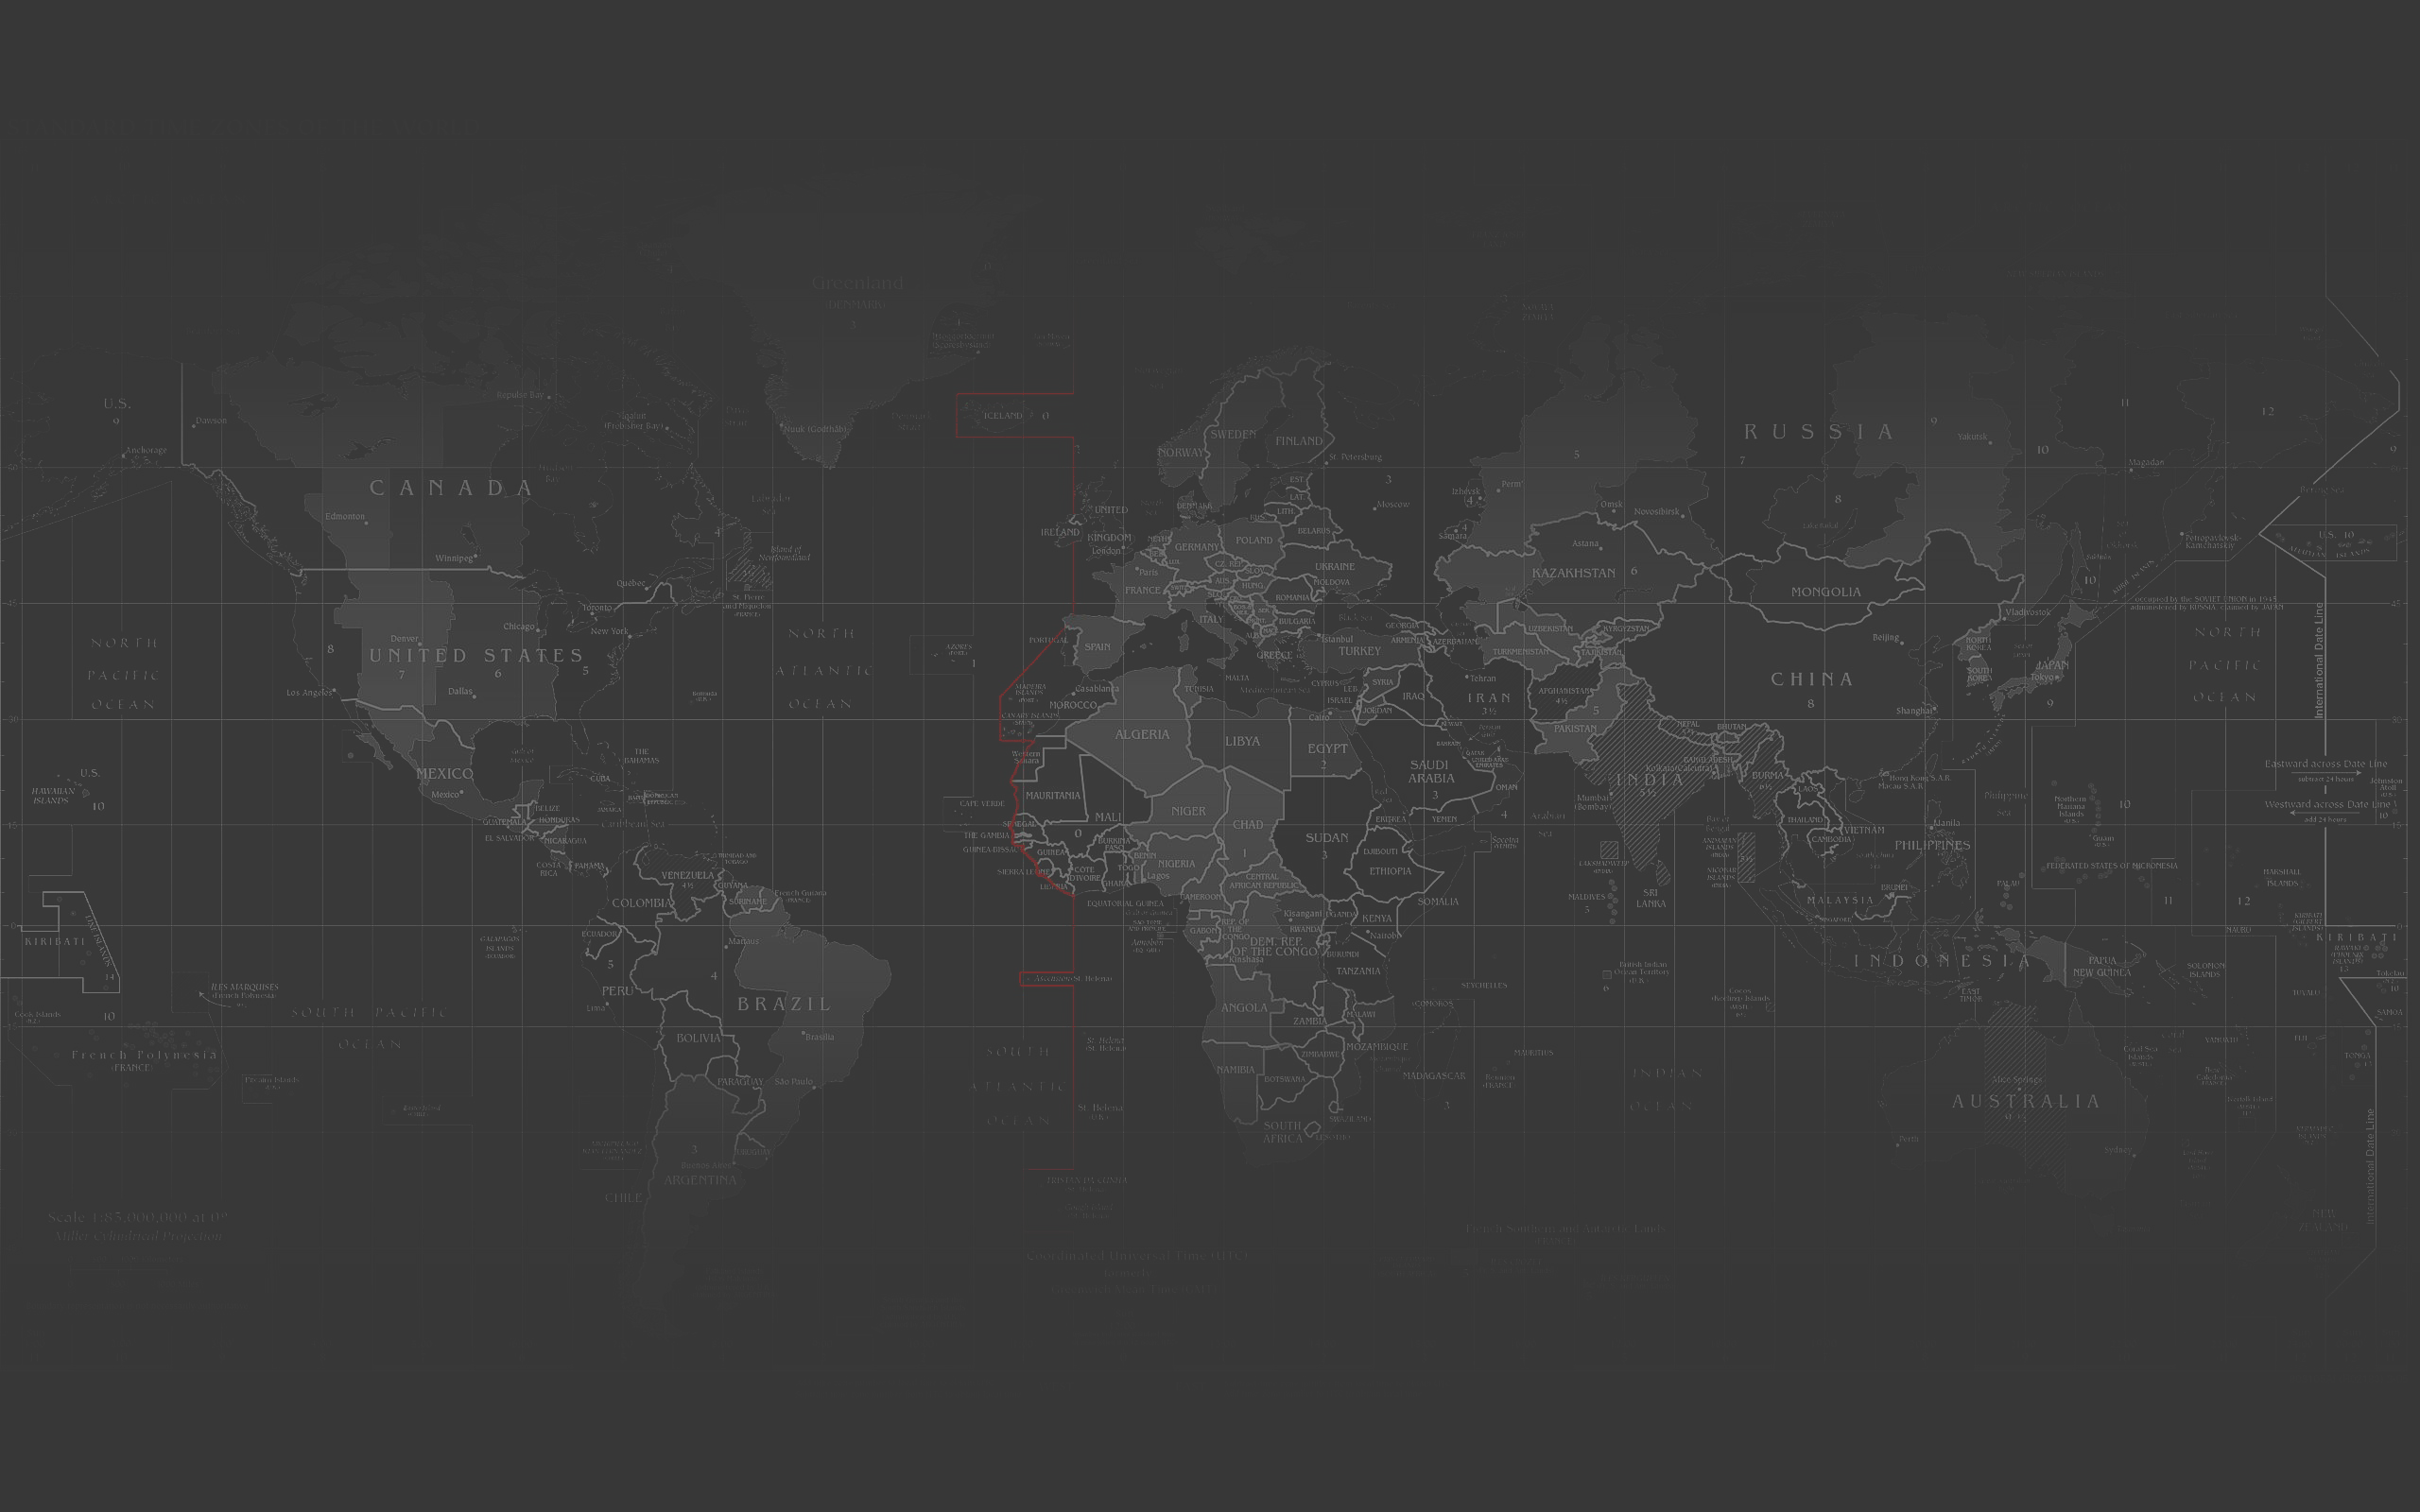 General 2560x1600 map world dark dark background continents geography Digital Grid time zones abstract